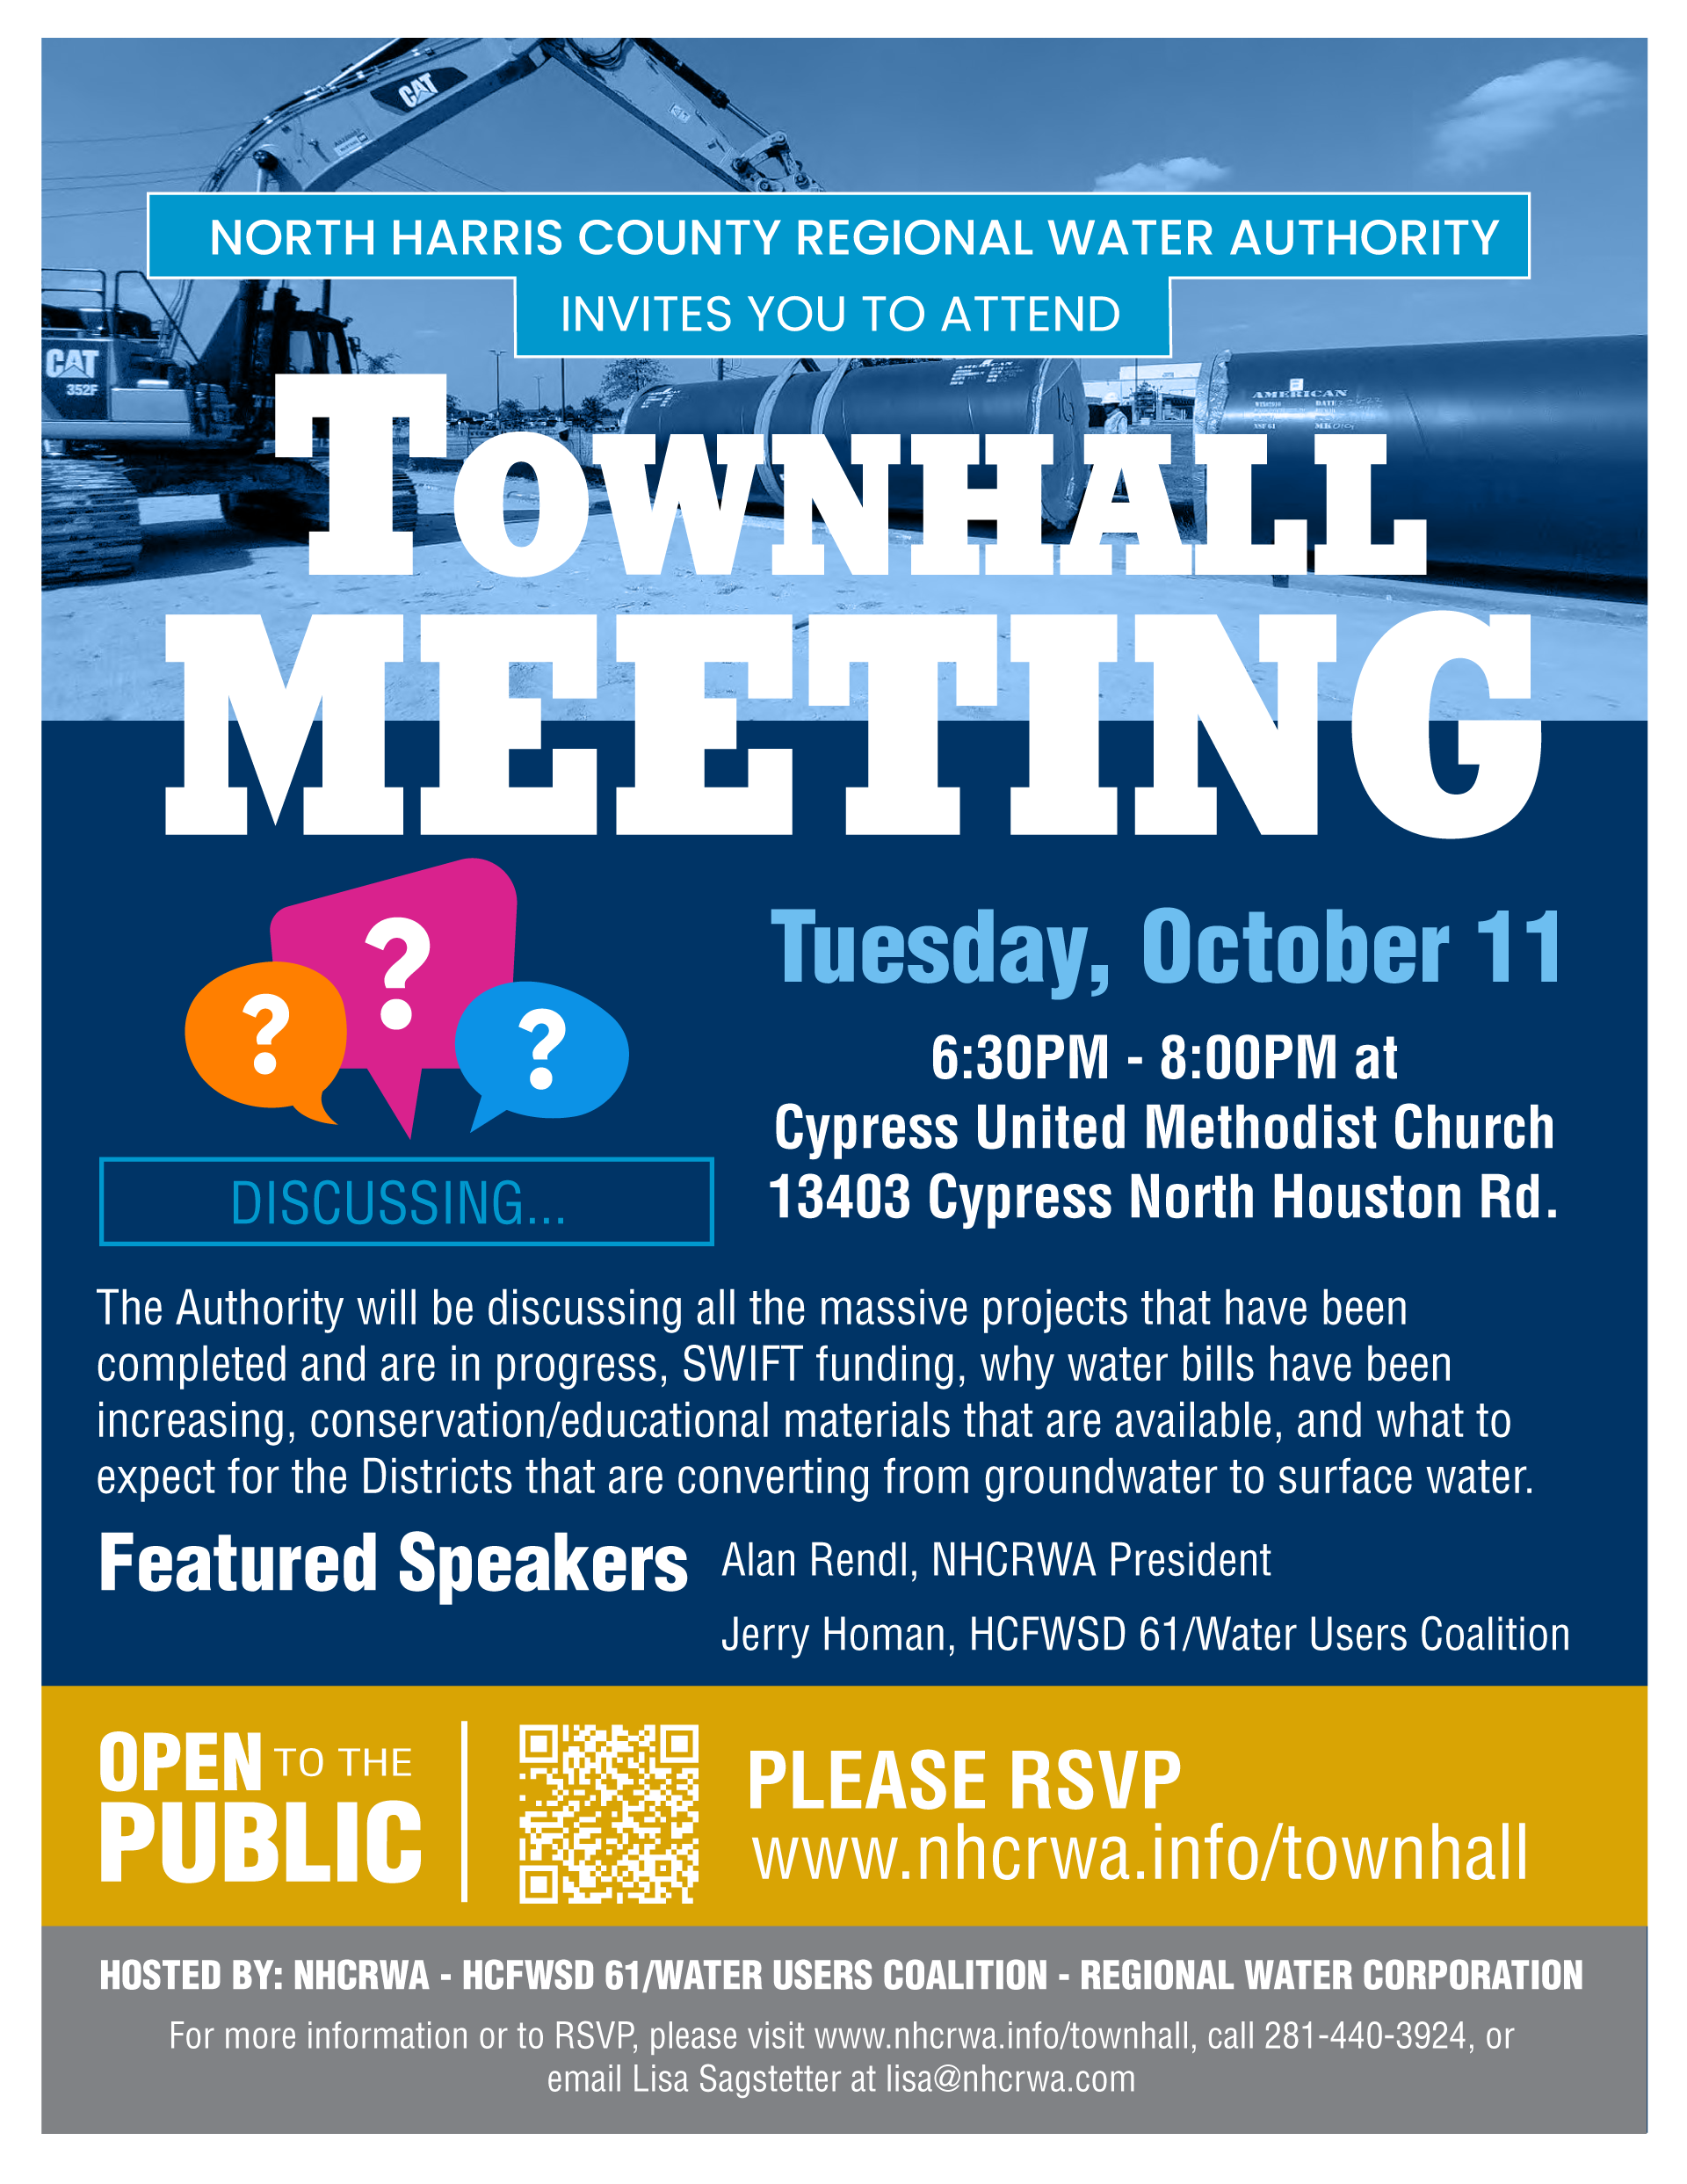 Townhall meeting